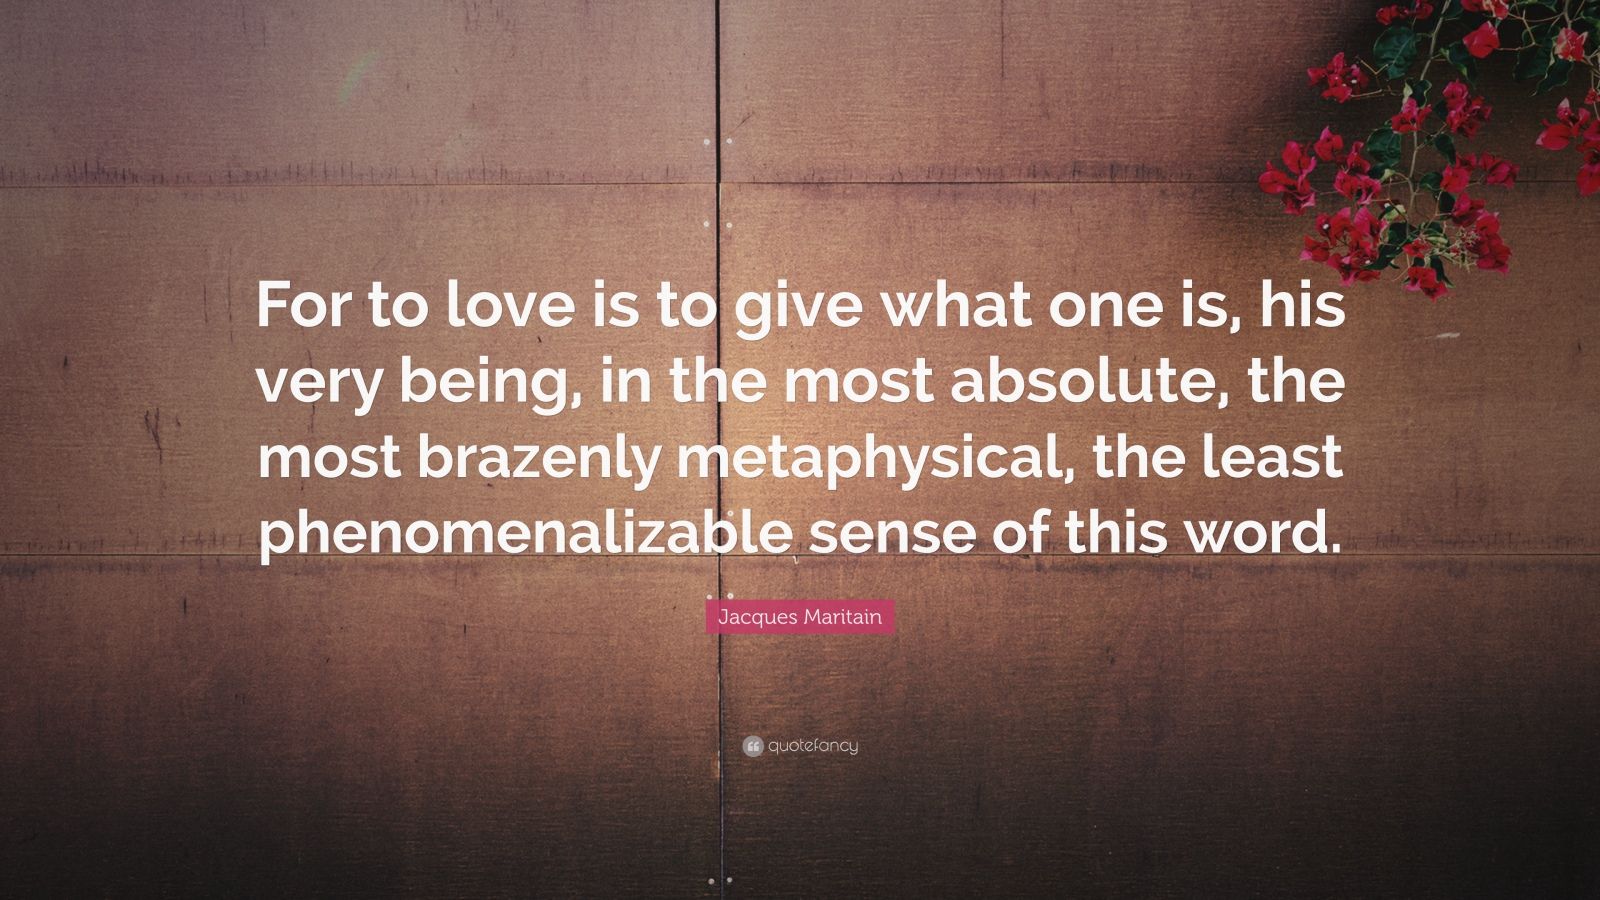 Jacques Maritain Quote: “For to love is to give what one is, his very ...